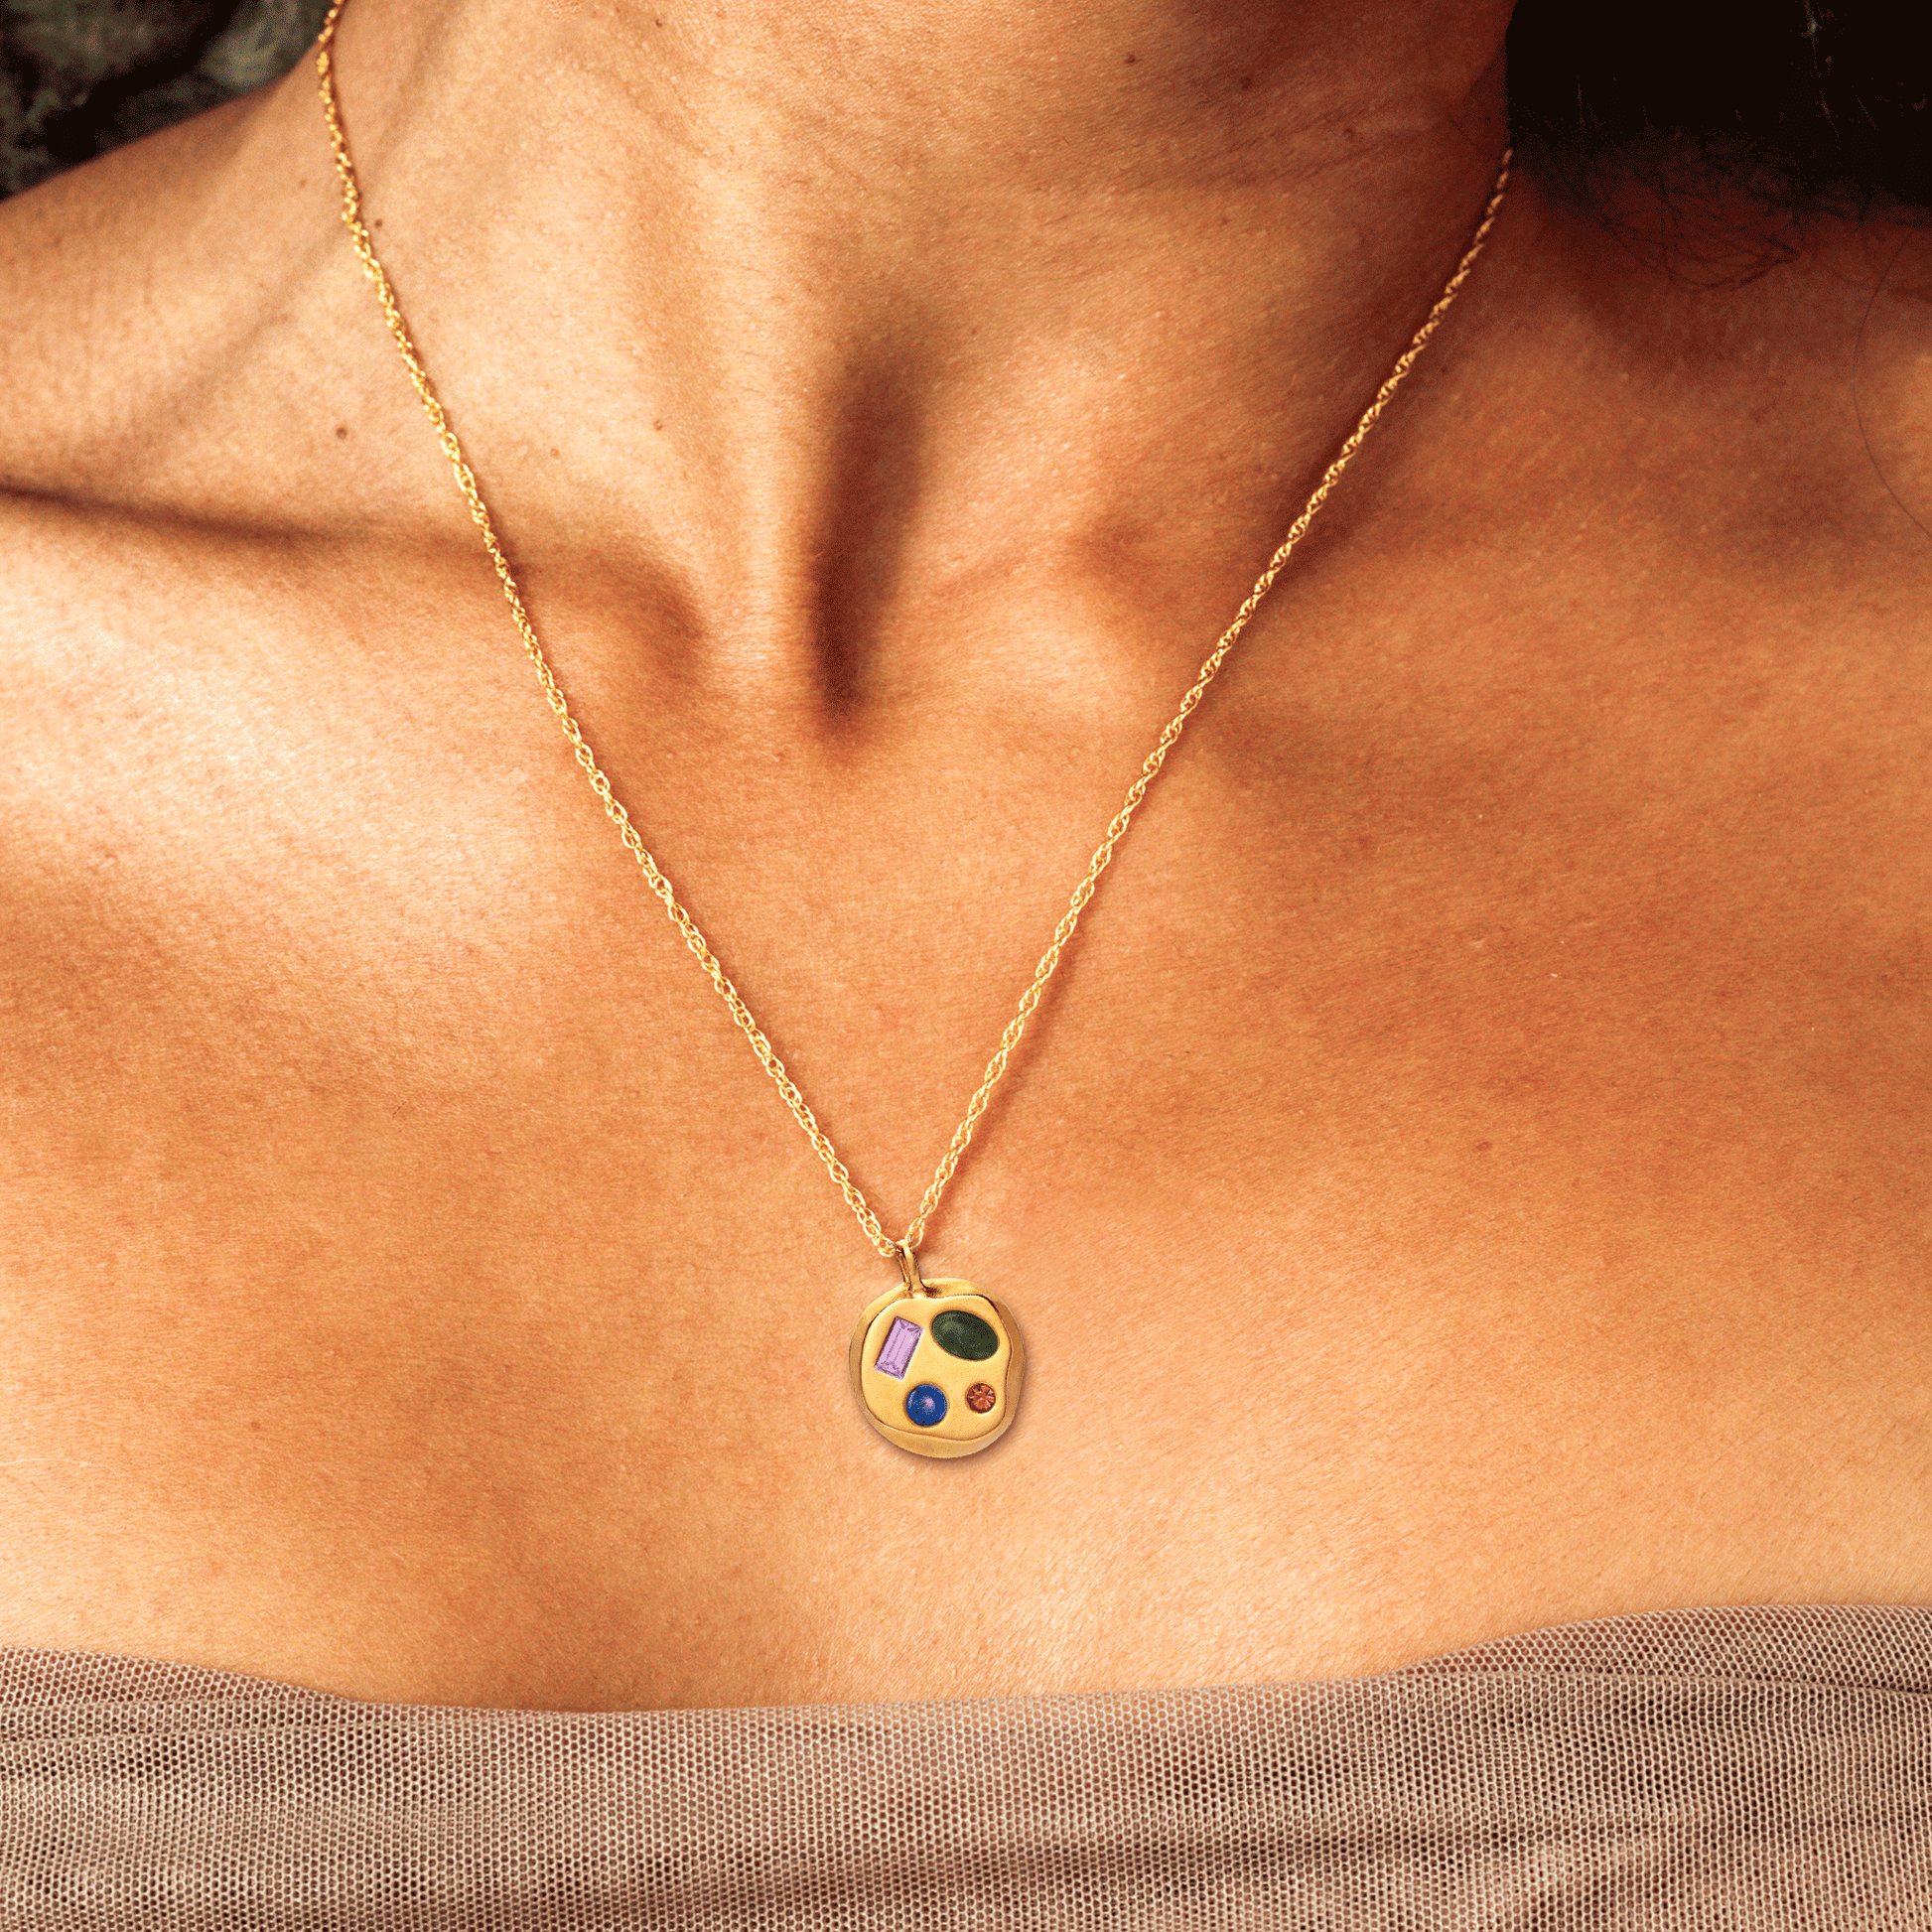 Person wearing The June Ninth Pendant